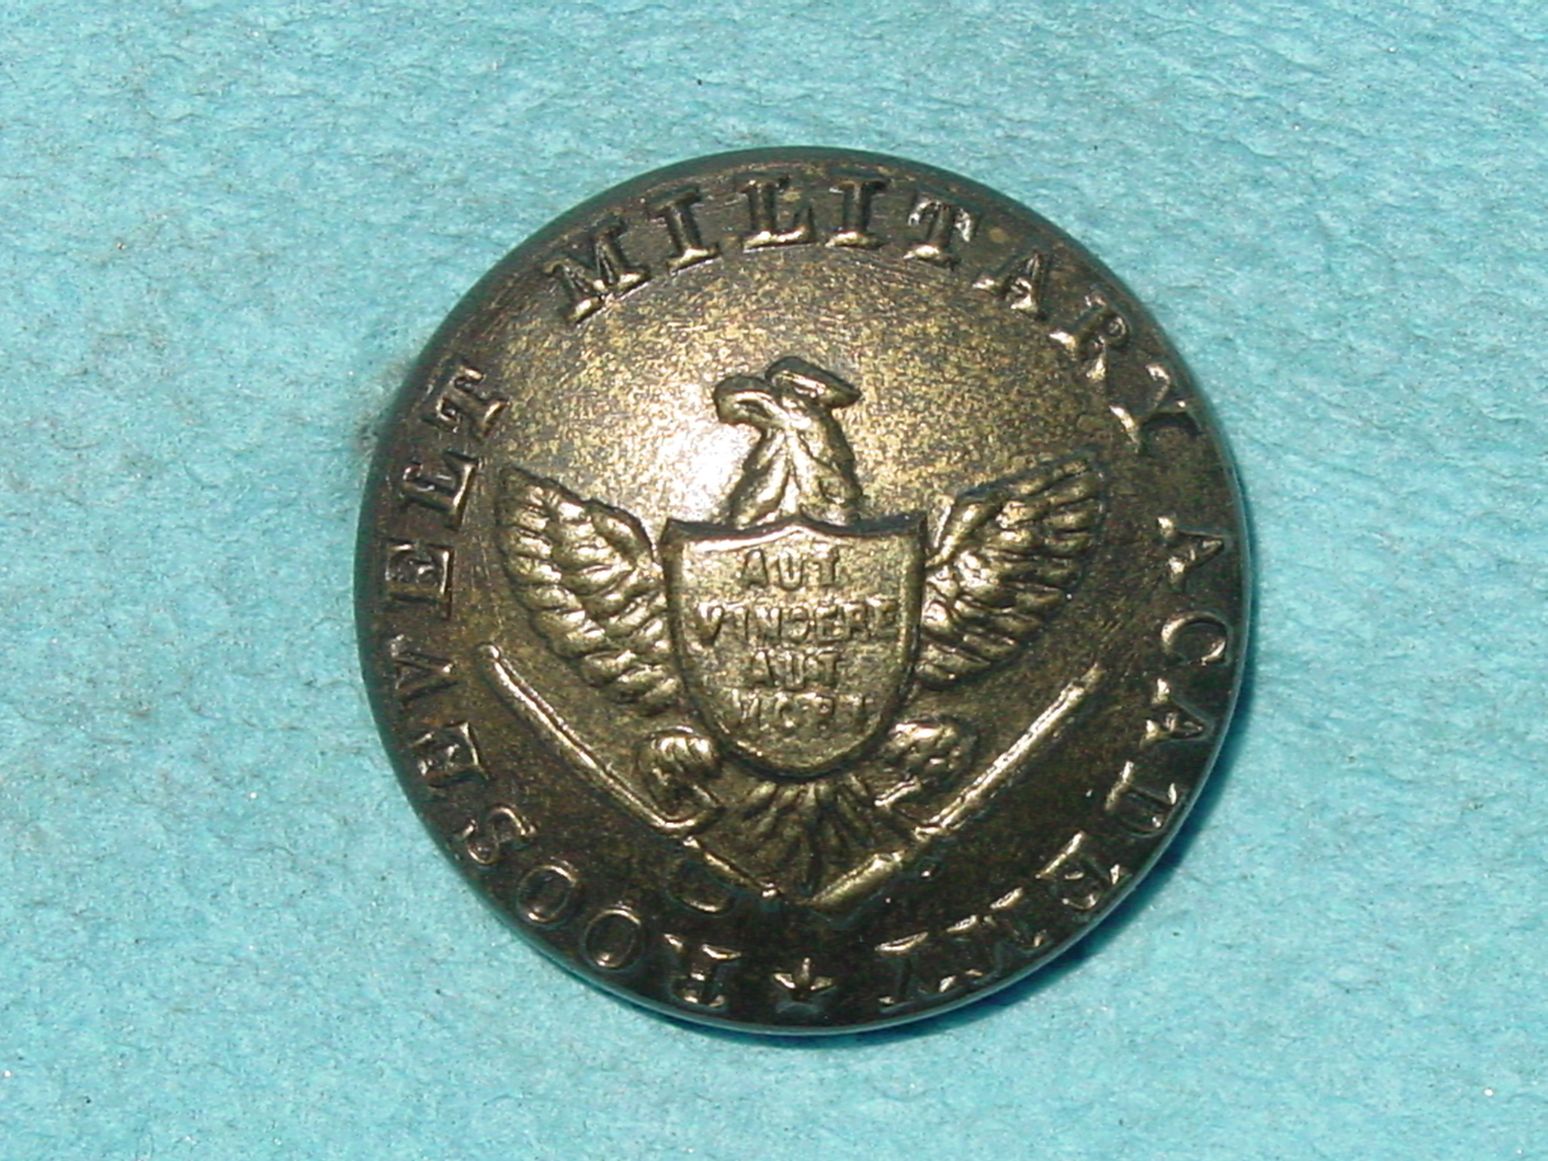 Pattern #11944 – ROOSEVELT Military Academy – Waterbury Button Company